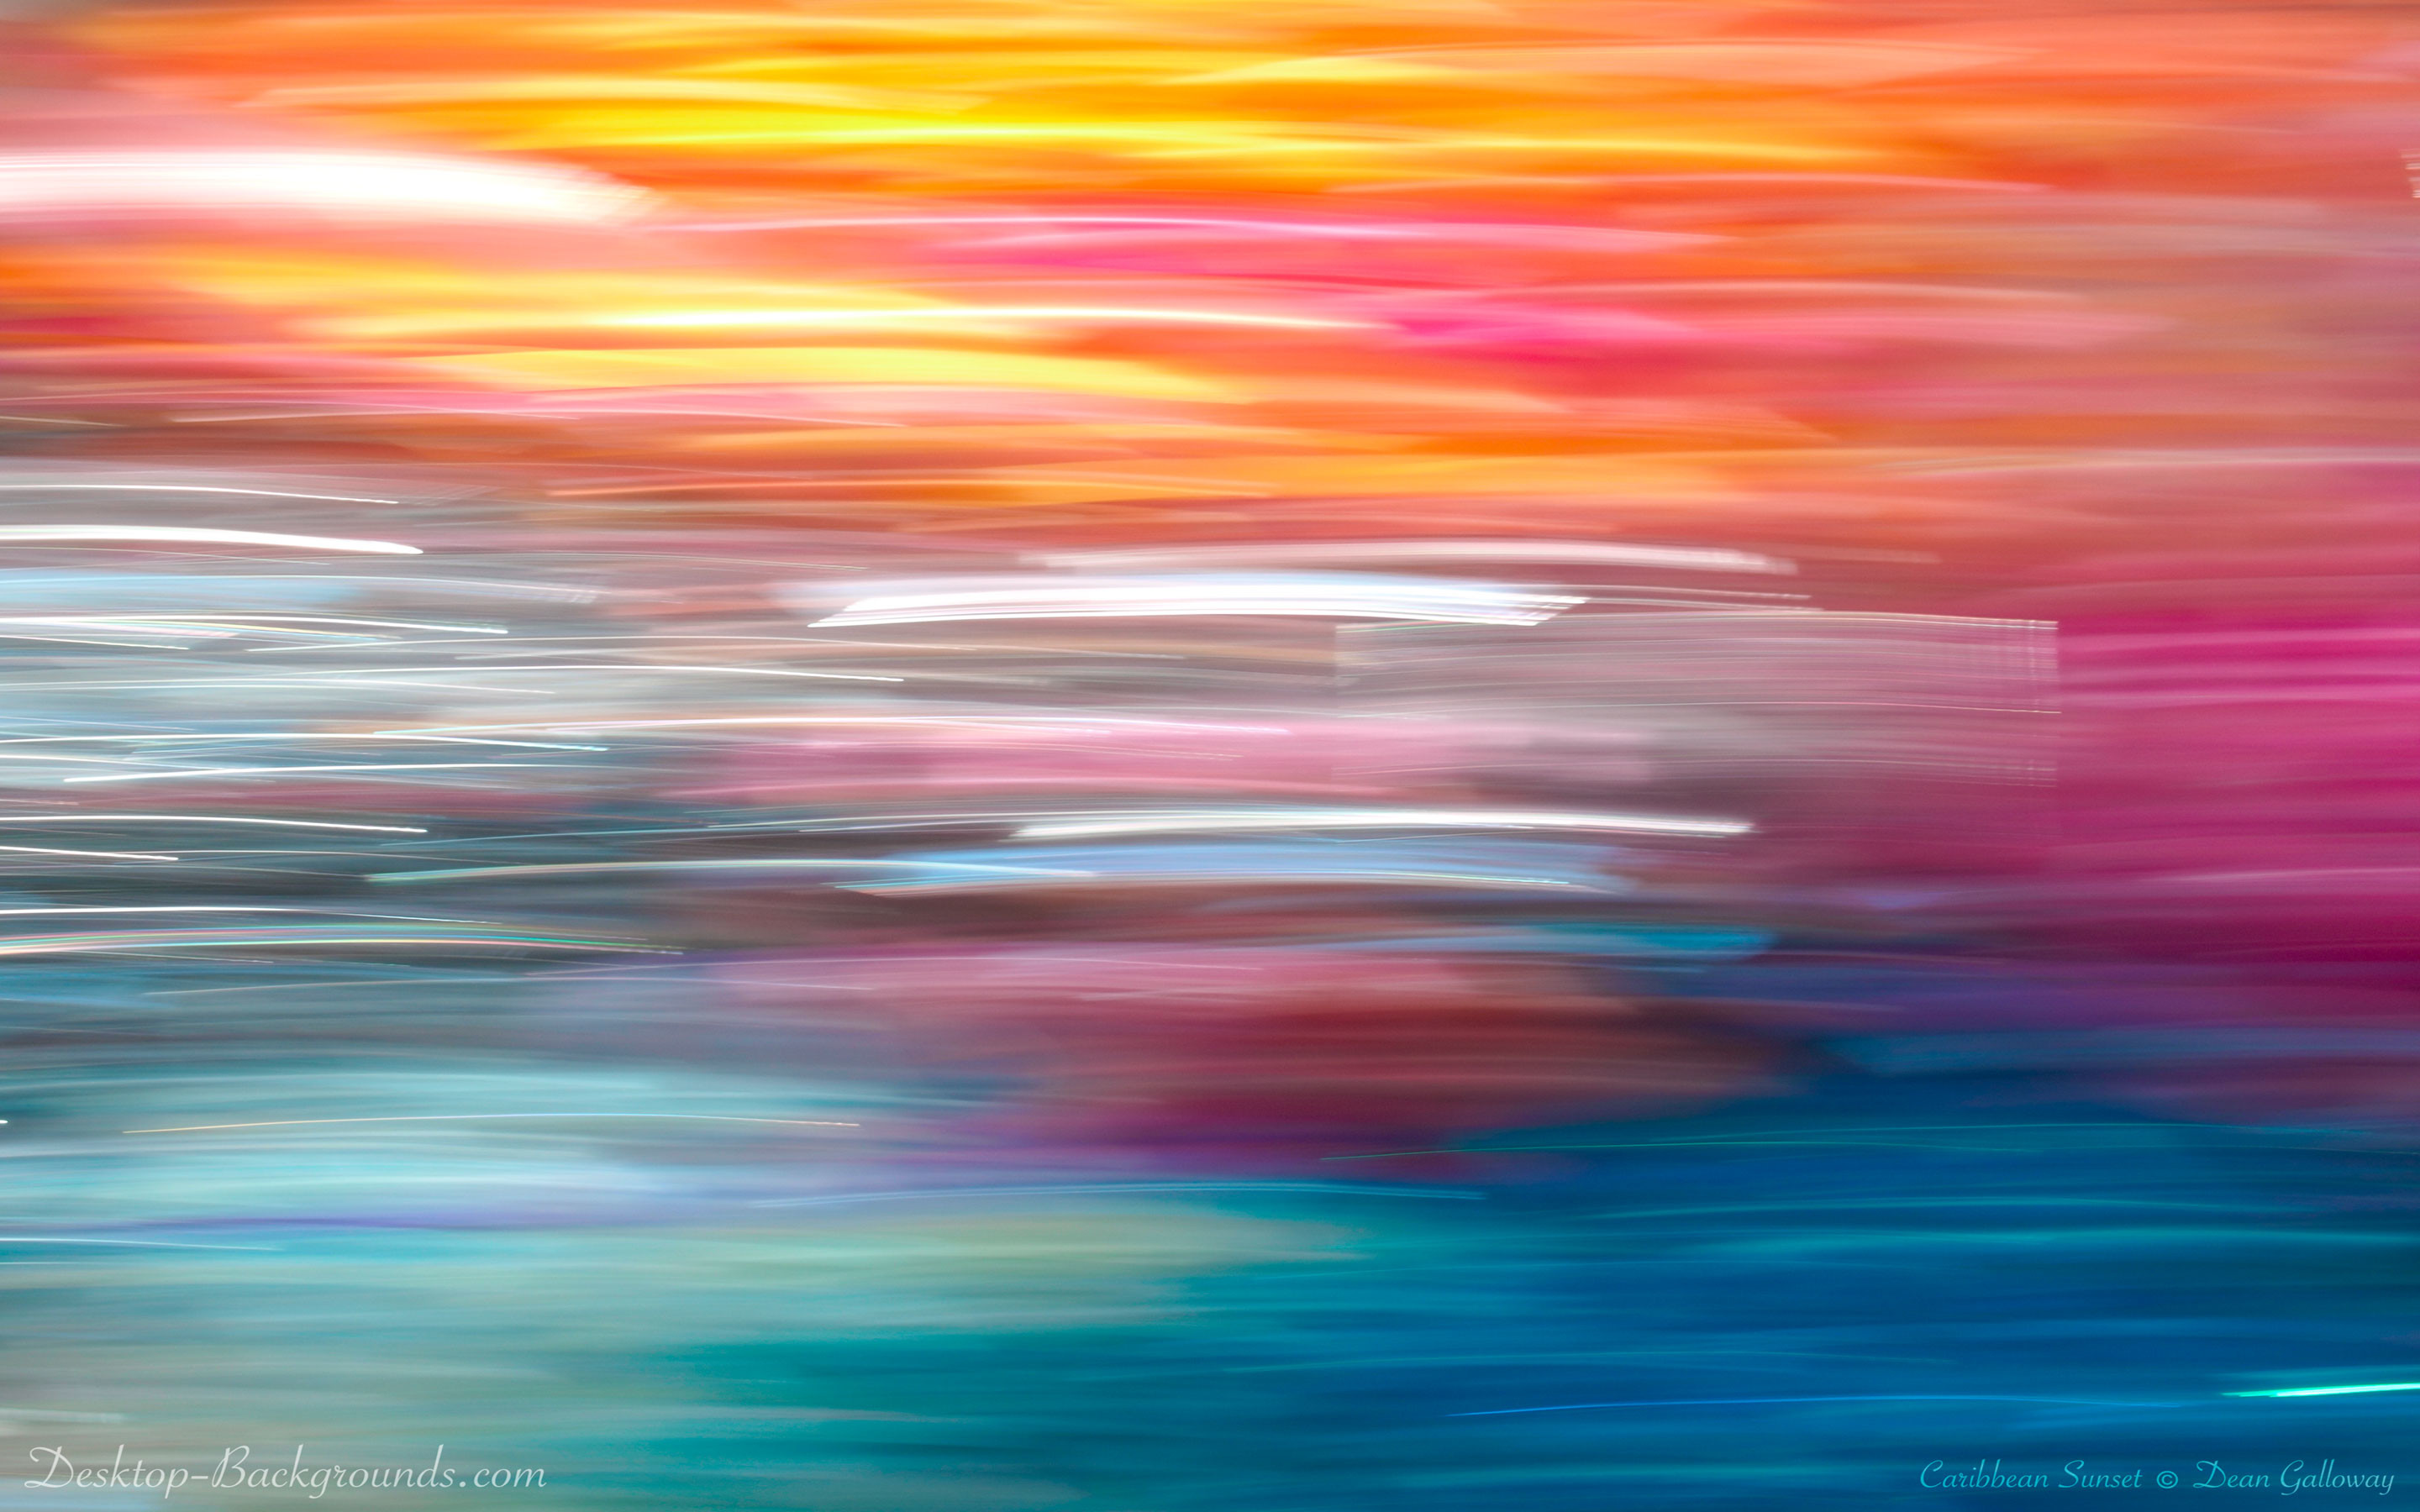 2880x1800 Take an abstract vacation with Caribbean Sunset, an original, high  resolution desktop background that evokes the atmosphere of the tropics.